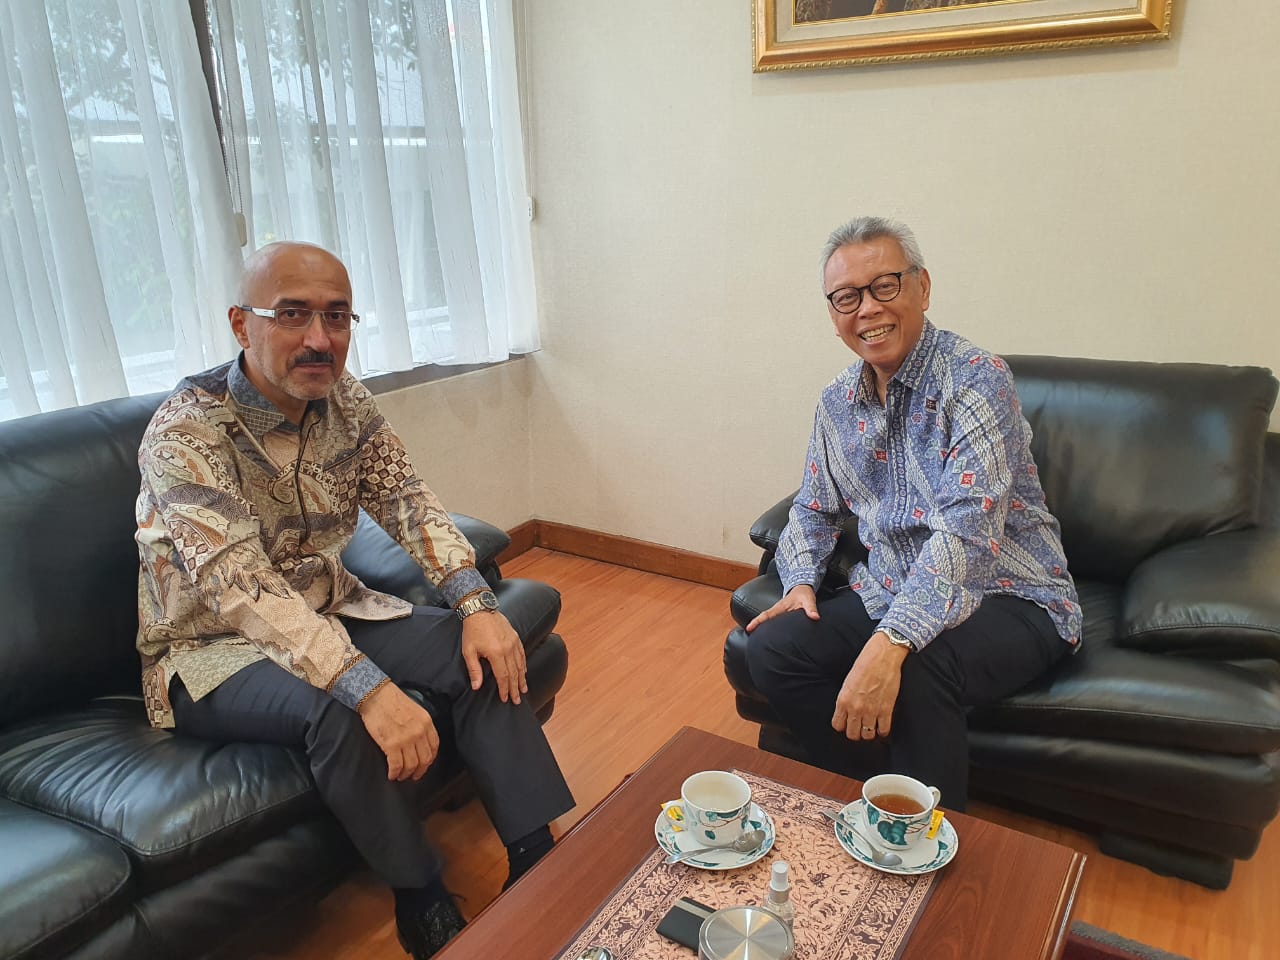 His Excellency Ardasher Qodiri, Ambassador Extraordinary and Plenipotentiary of the Republic of Tajikistan, to the Republic of Indonesia met with His Excellency Andy Rachmianto, Director General for Protocol and Consular Affairs of the Ministry of Foreign Affairs of the Republic of Indonesia.